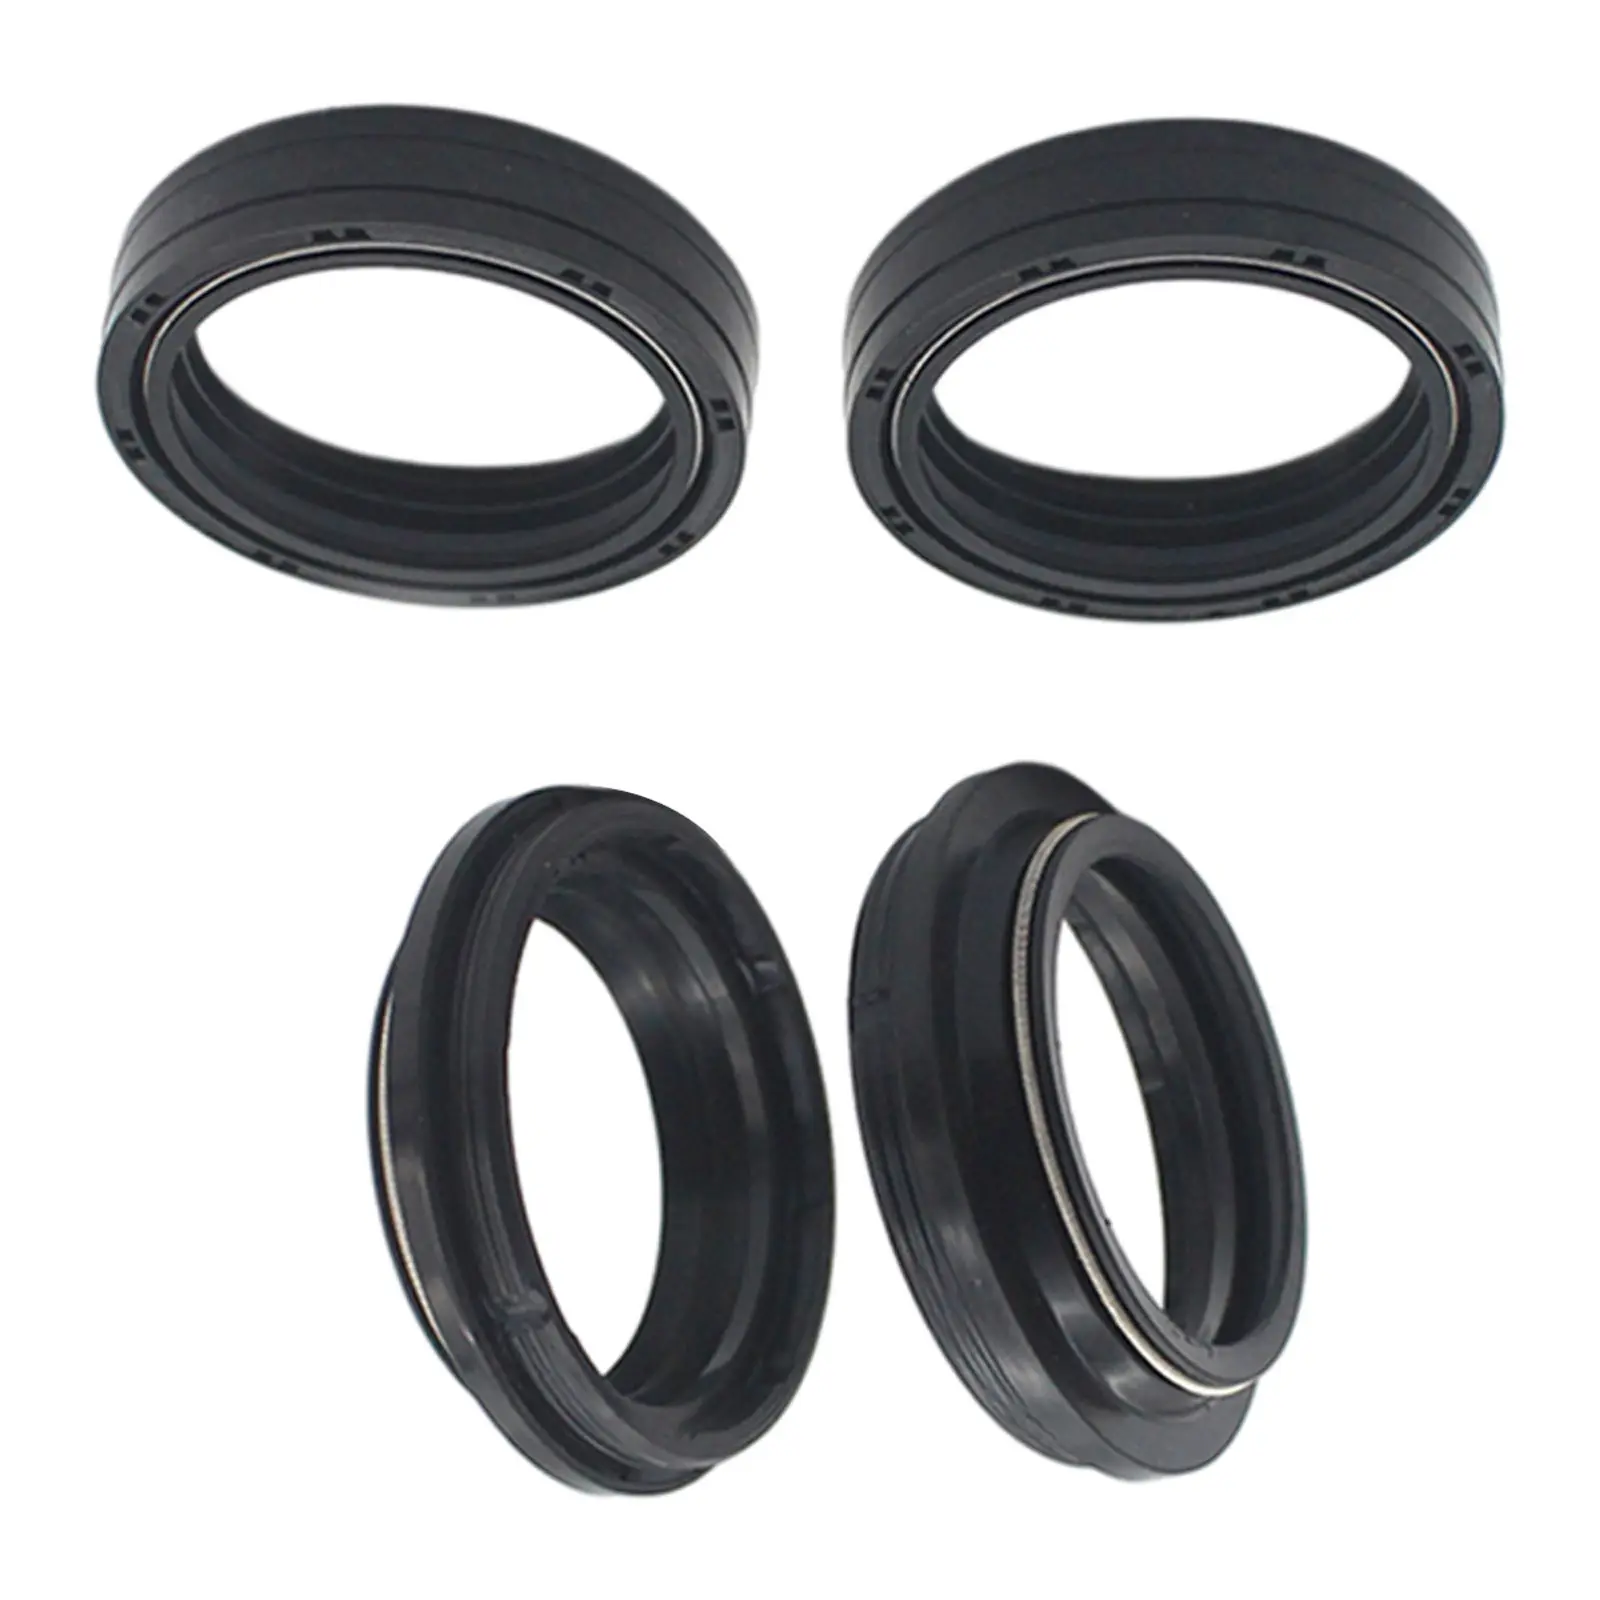 2 Pieces Fork and Dust Seal Kit Compatible Dust Seal Set Fit for R1200GS Adventure 2006-2012 for BMW F650CS ABS 2003-2005